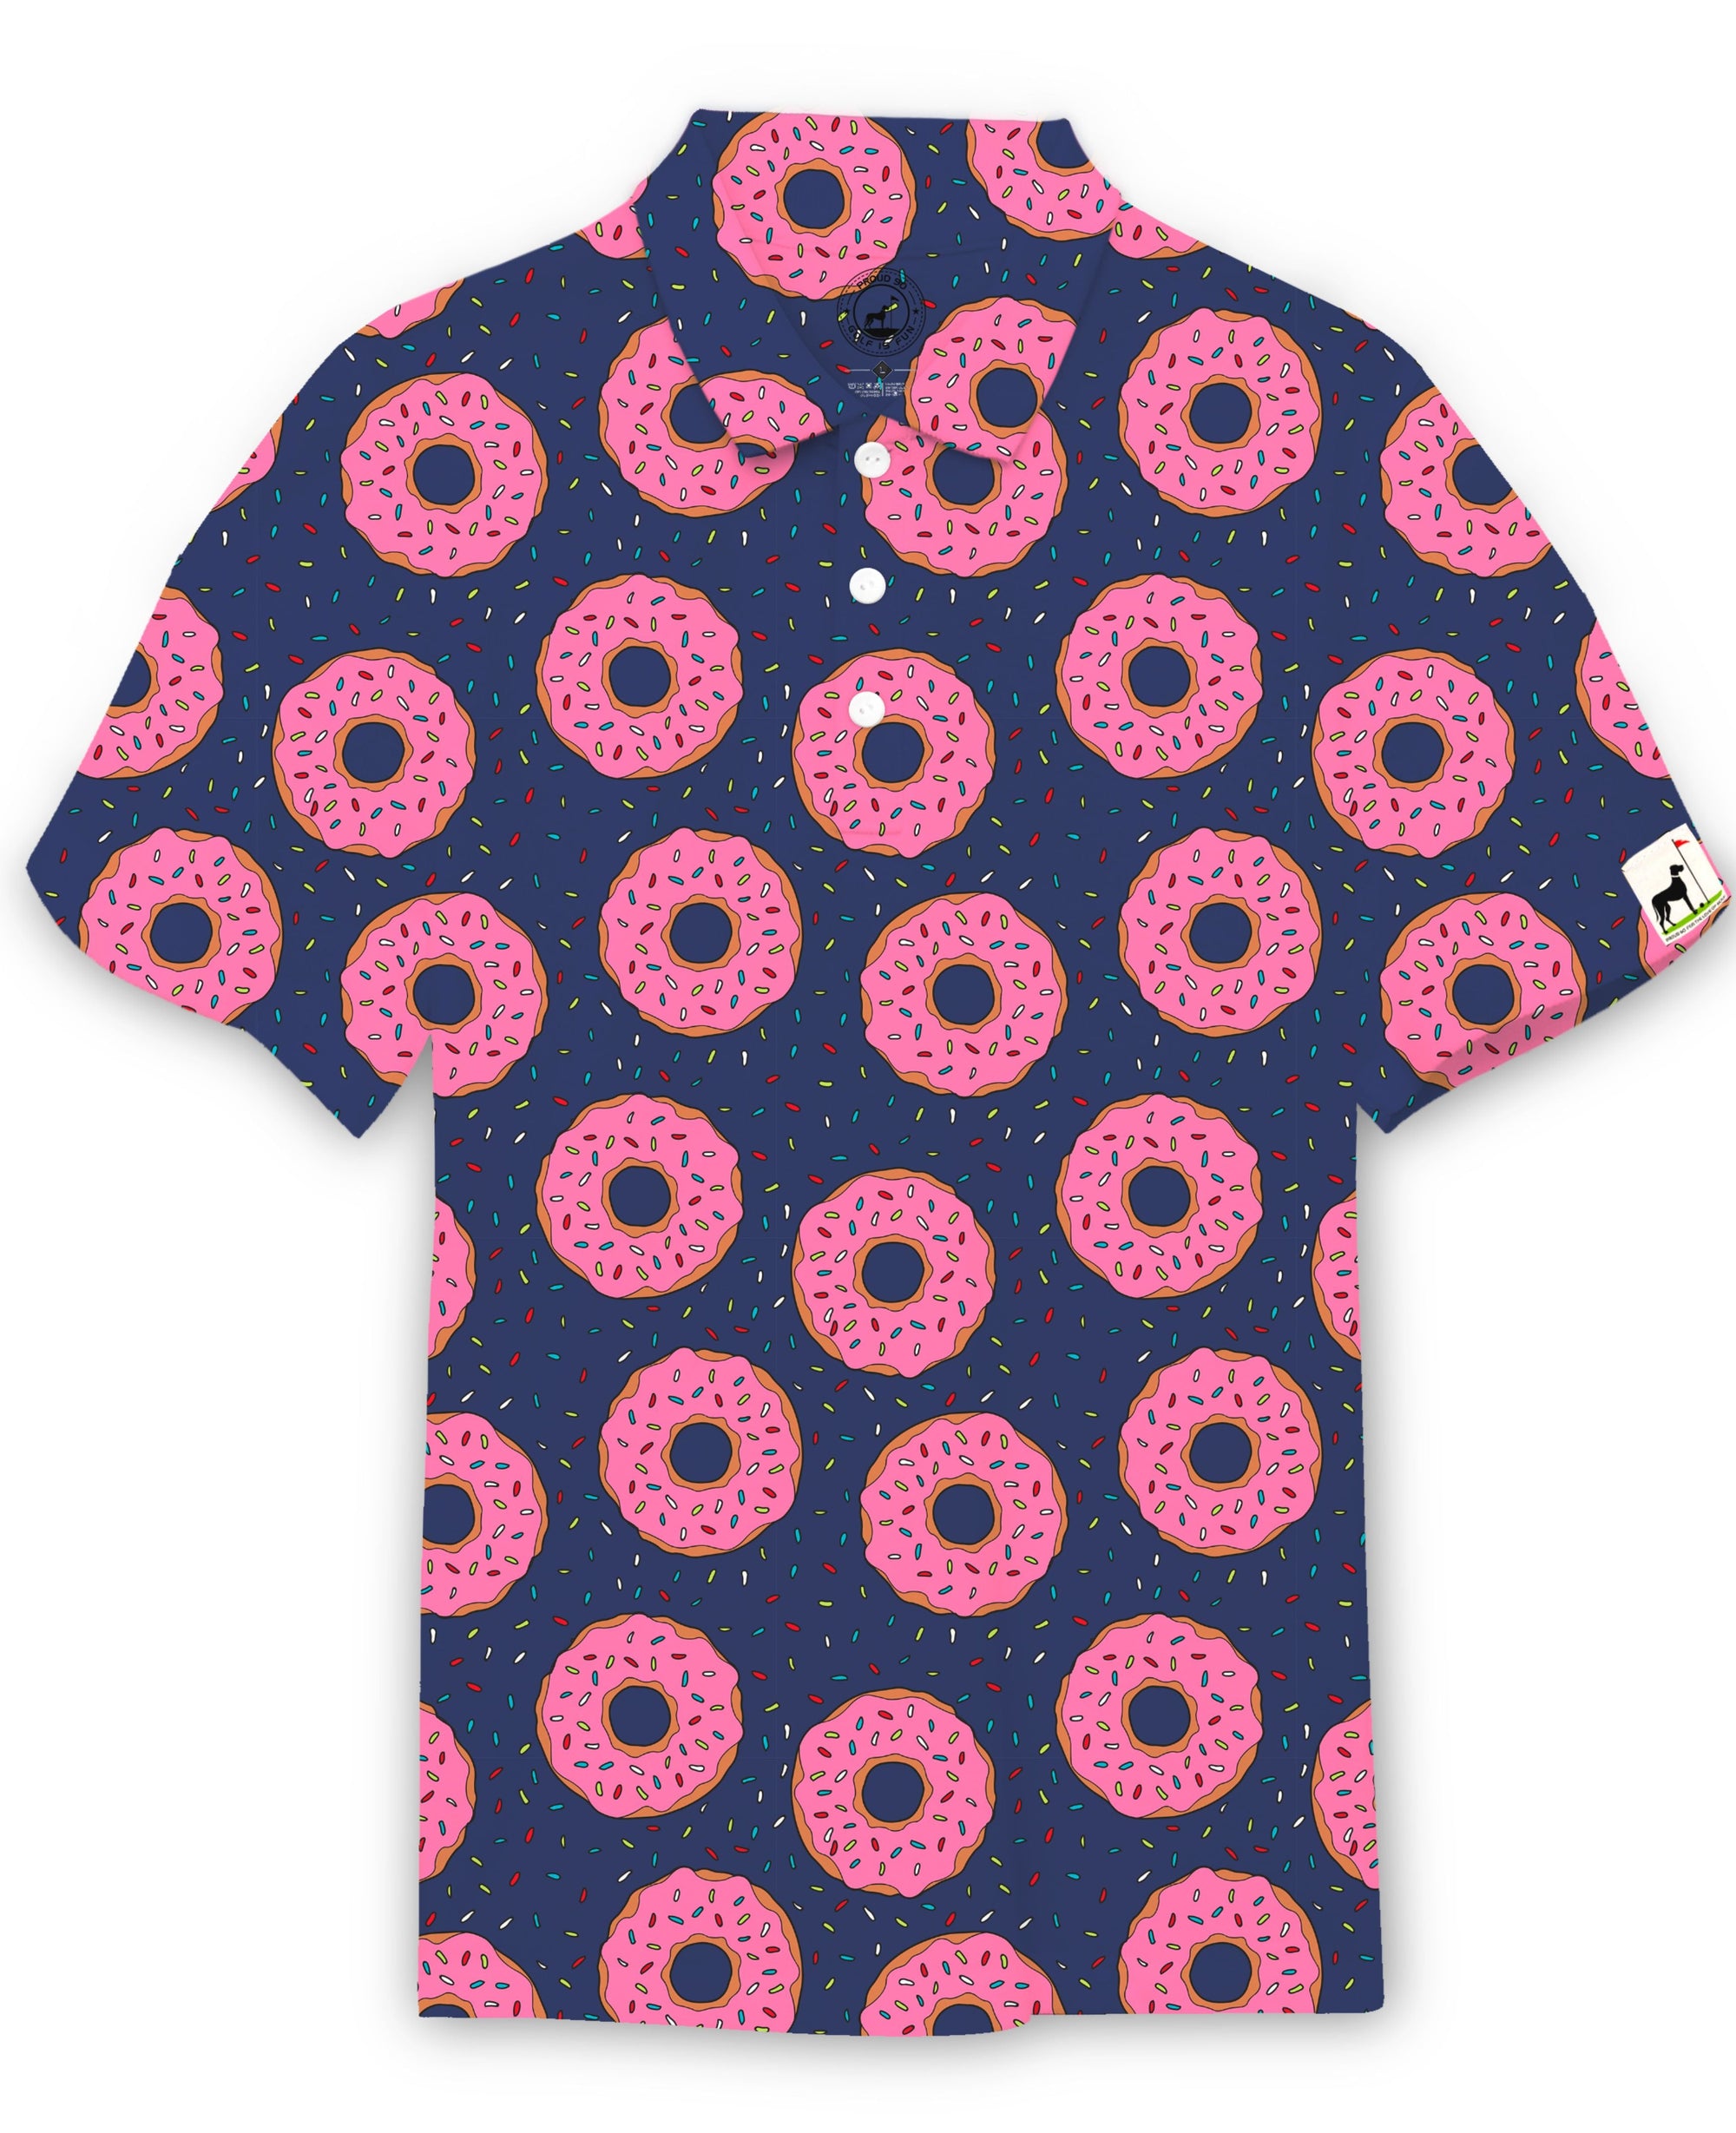 Donuts Make Me GO Nuts Men's Fall/Winter Proud 90 